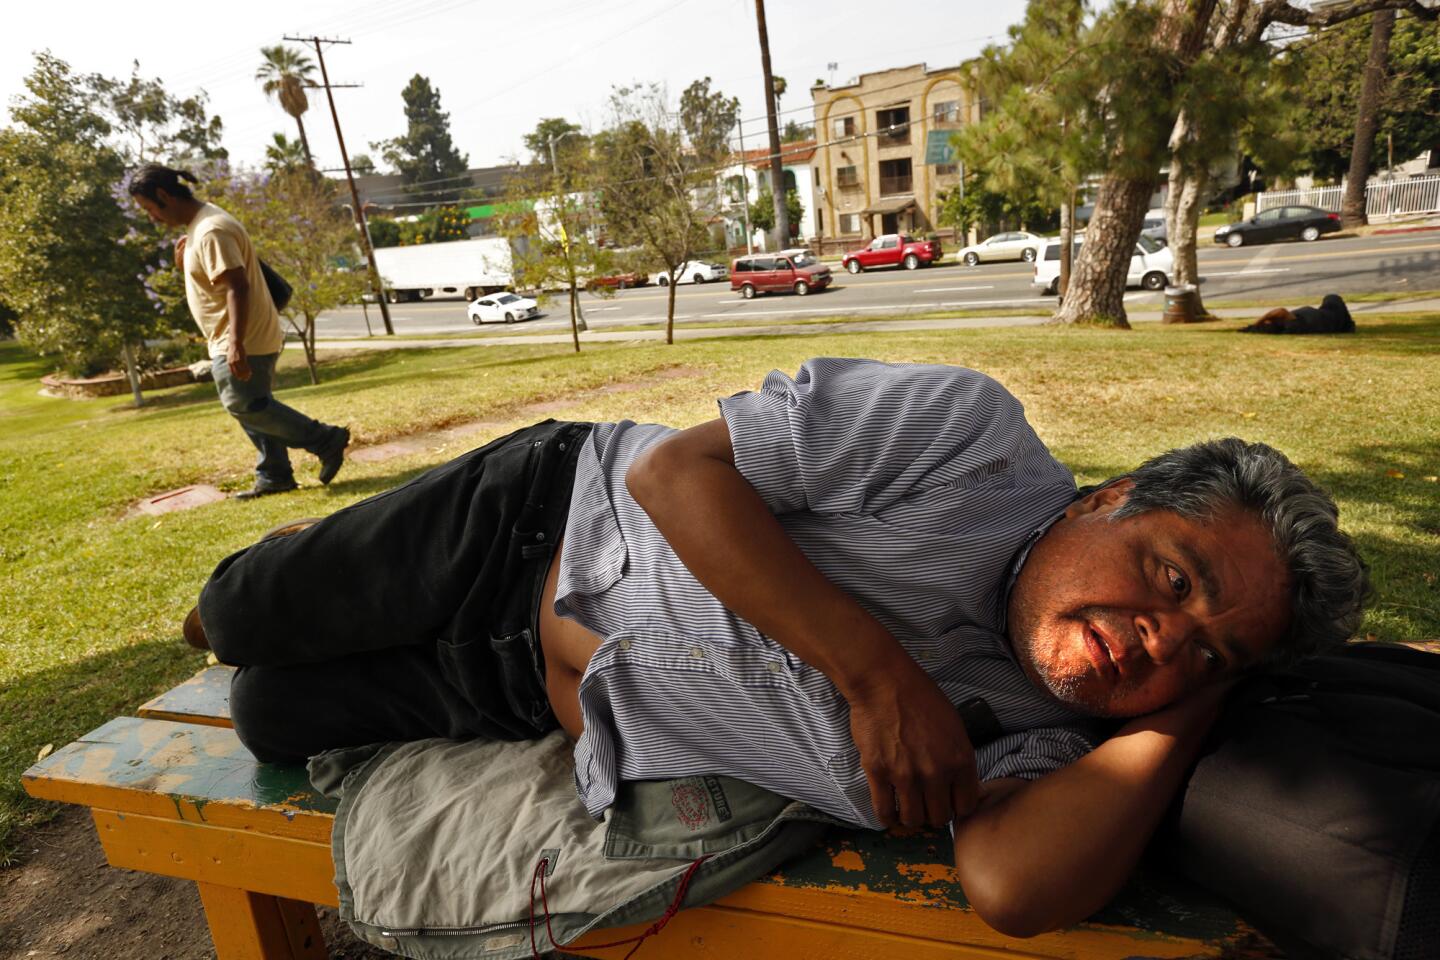 Timoteo Arevalos, 55, rests in Hollenbeck Park in Boyle Heights, June 6. Arevalos, who has been homeless for a few months, spends his days in the park. "I feel safe. This is home," he said.